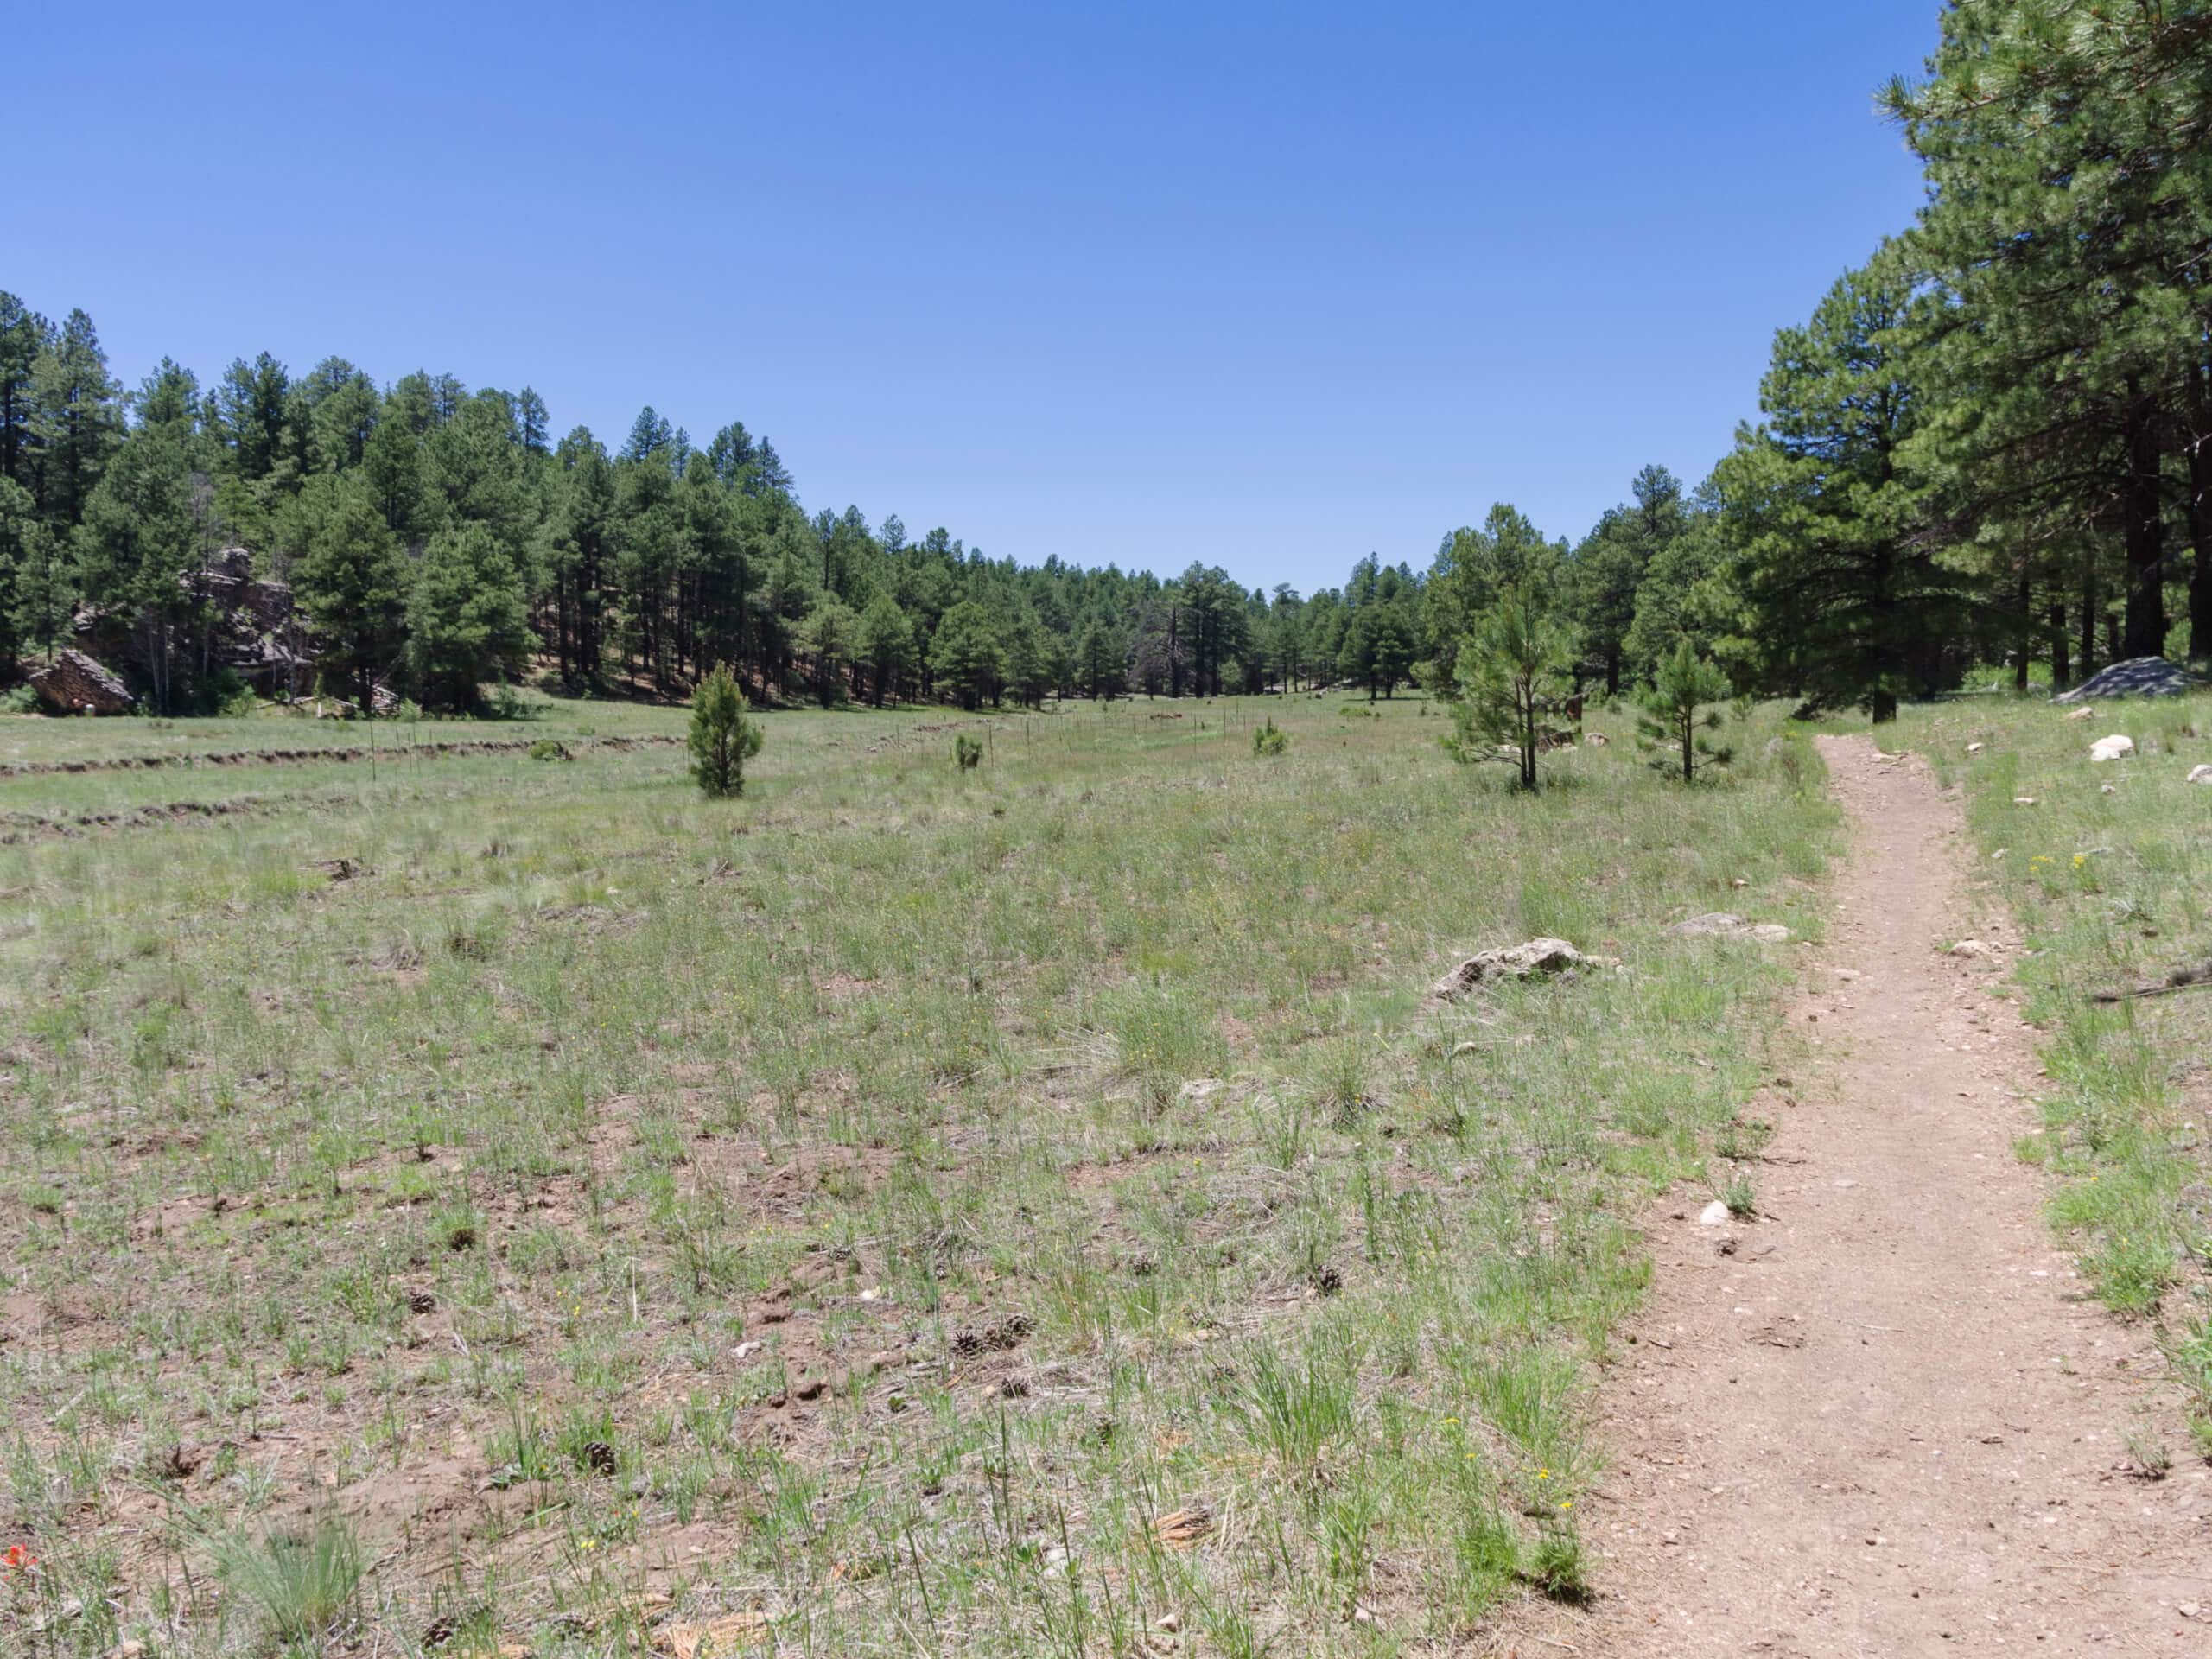 Guide Priest Draw Trail in Coconino National Forest